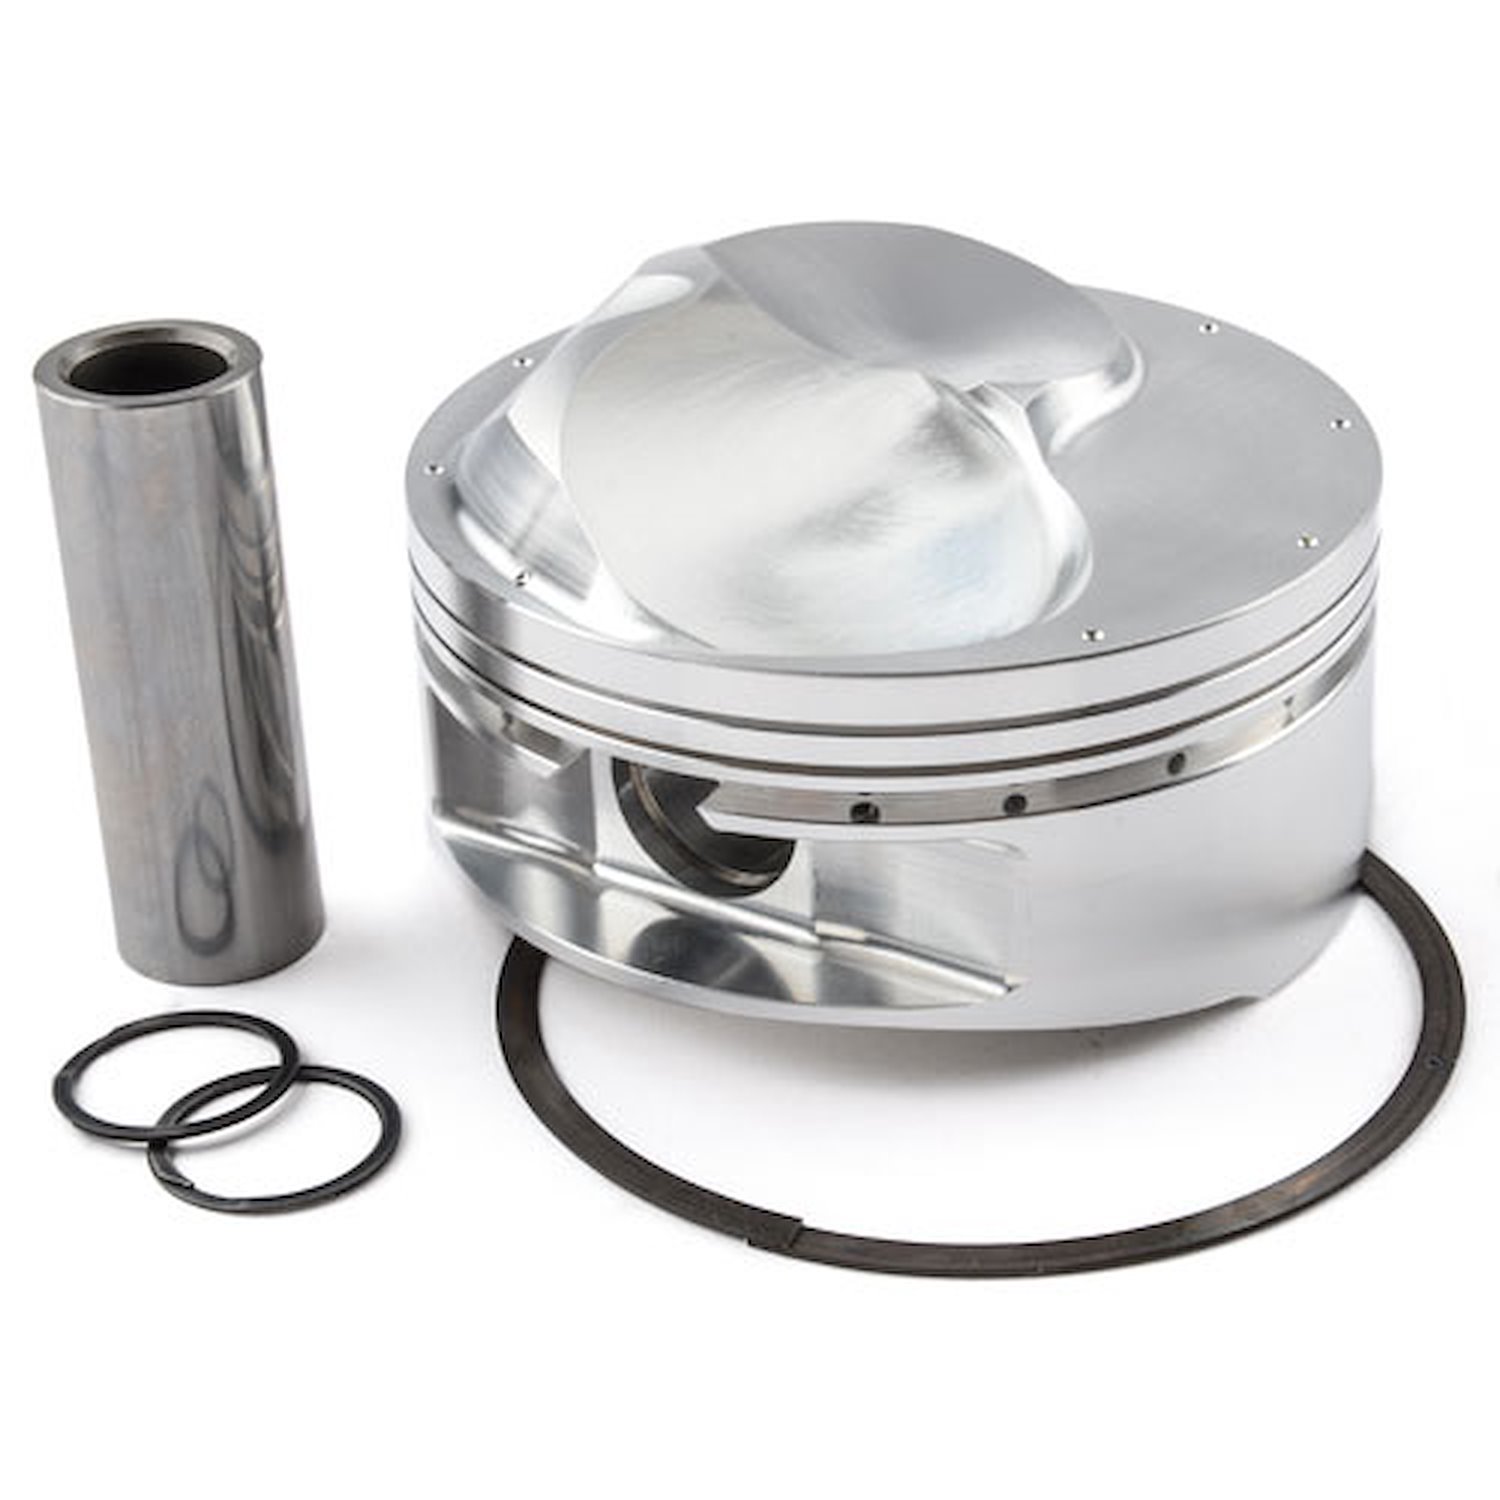 BB-Chevy Dome Pistons Bore 4.625"